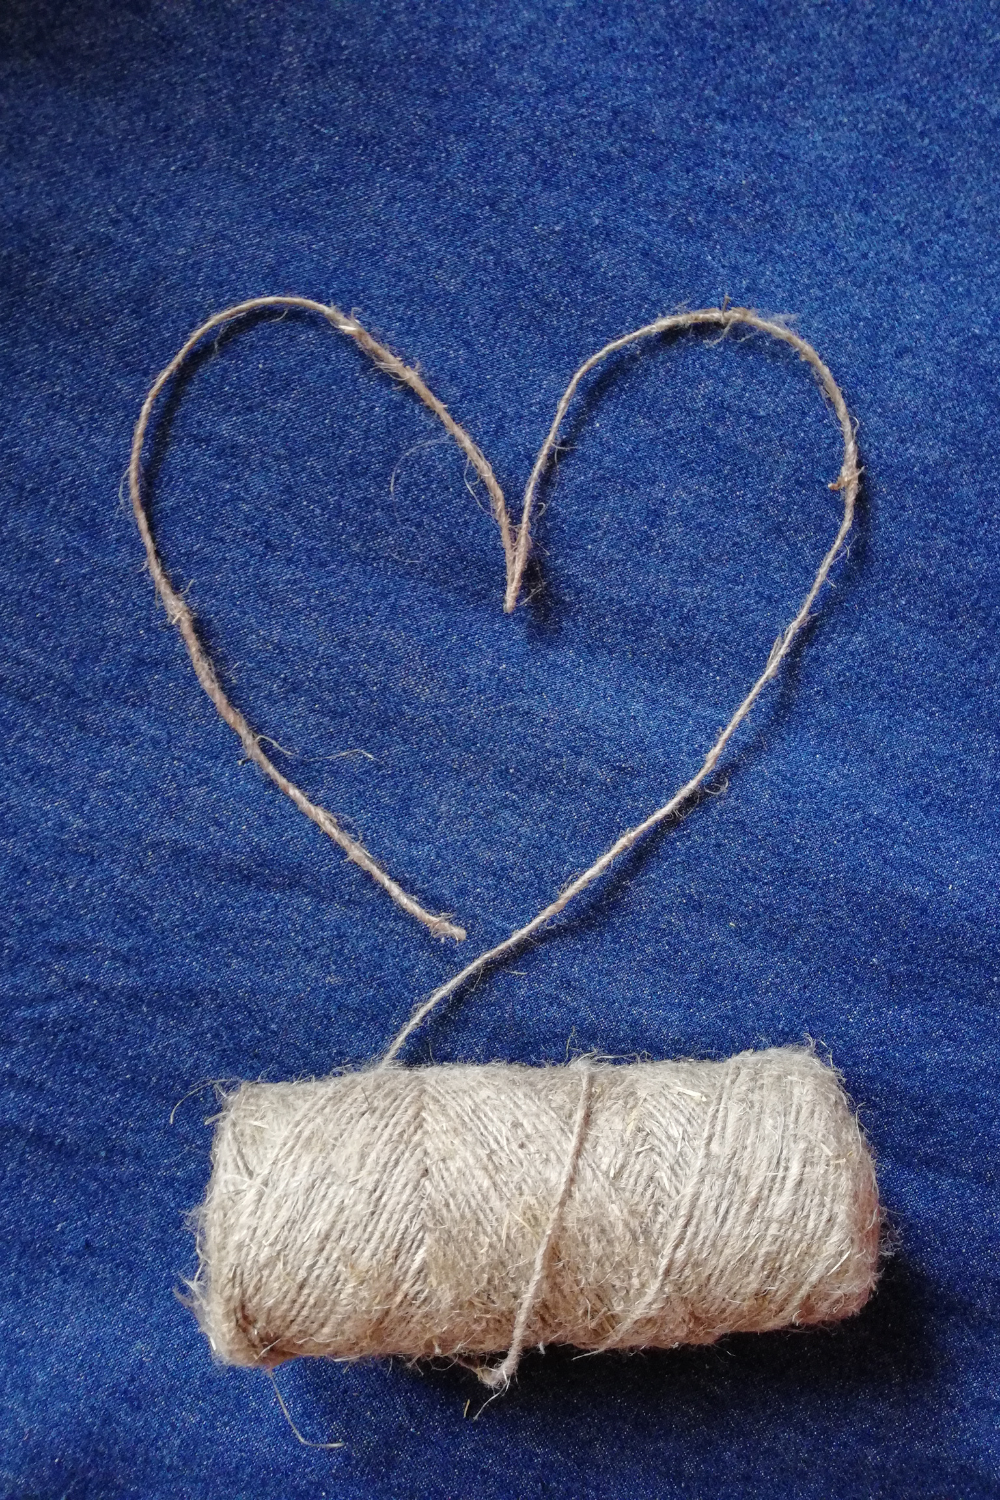 Knitting as an act of kindness